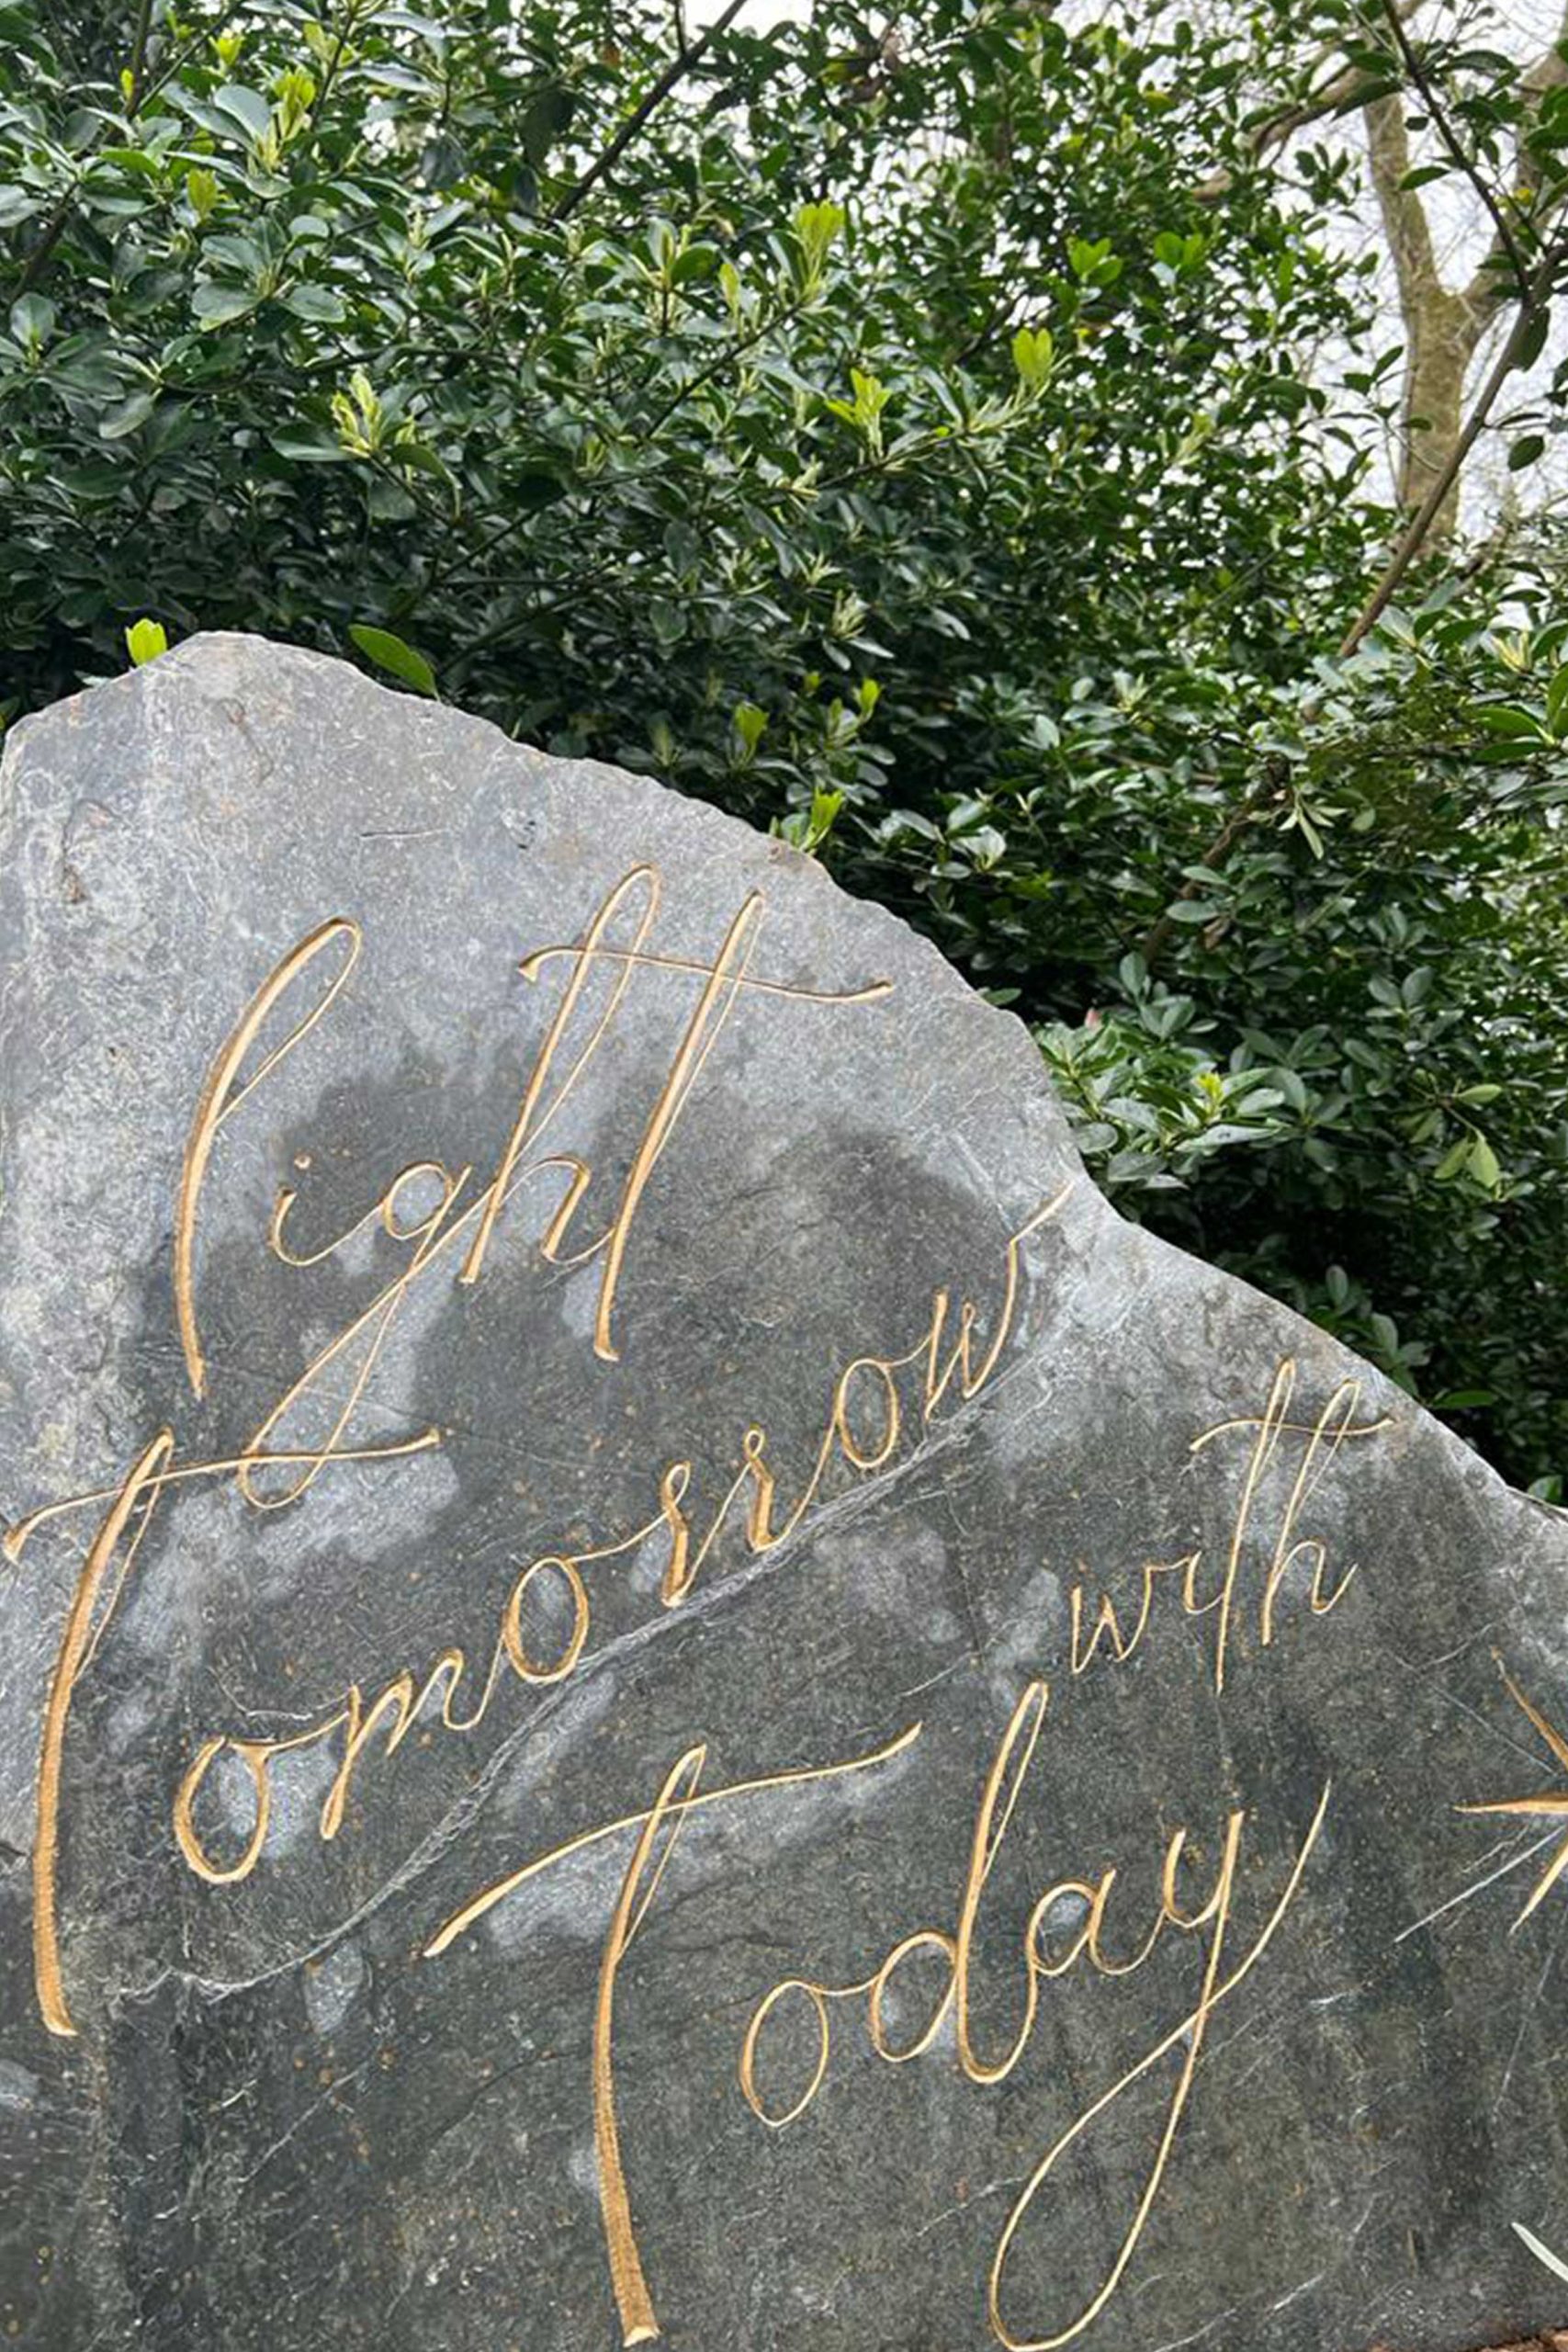 Poet's Stone Light Tomorrow With Today by Ben Dearnley